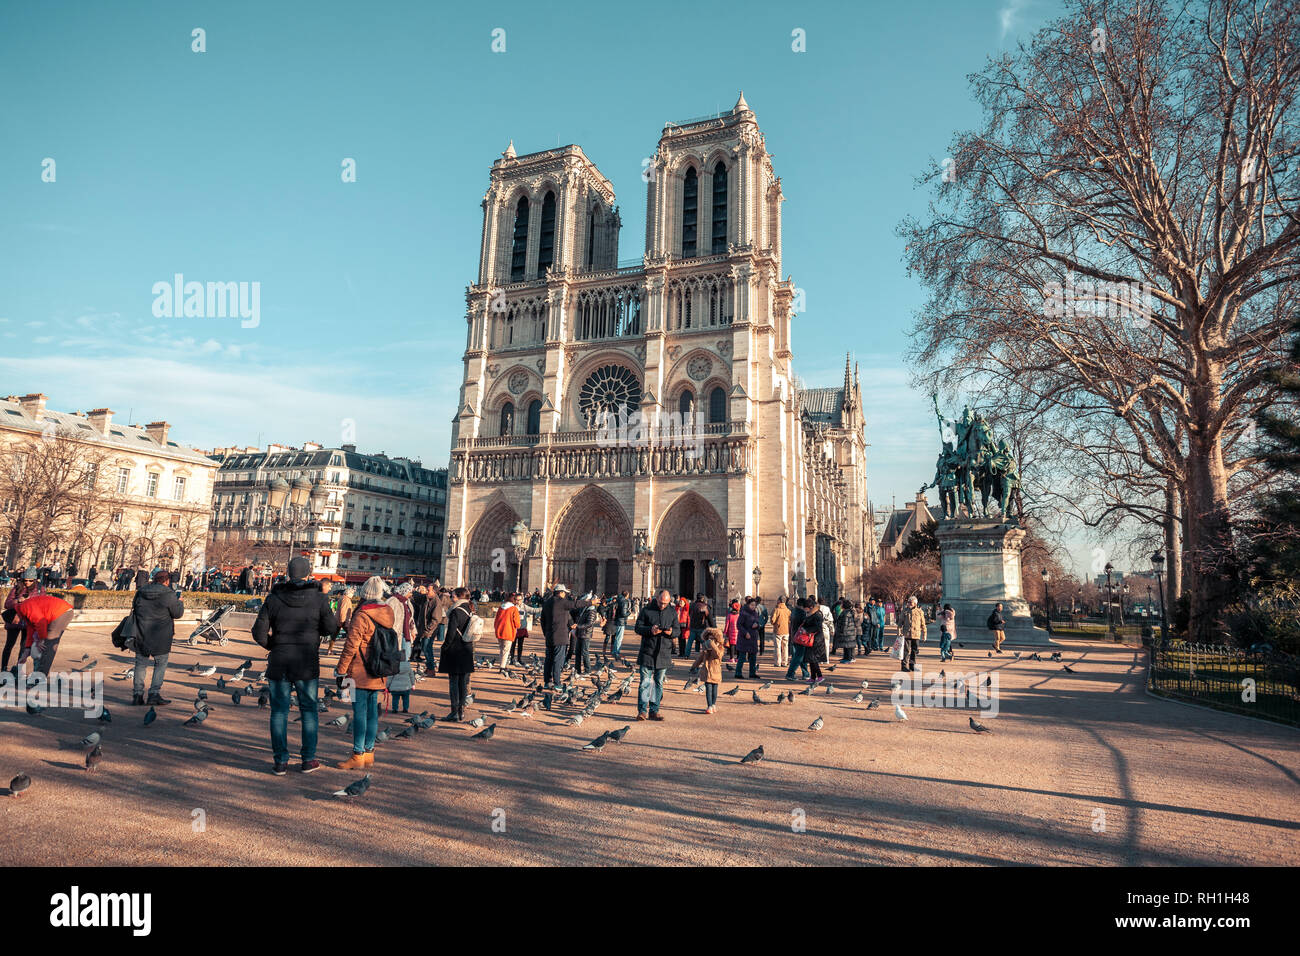 Page 9 - 2019 01 18 High Resolution Stock Photography and Images - Alamy